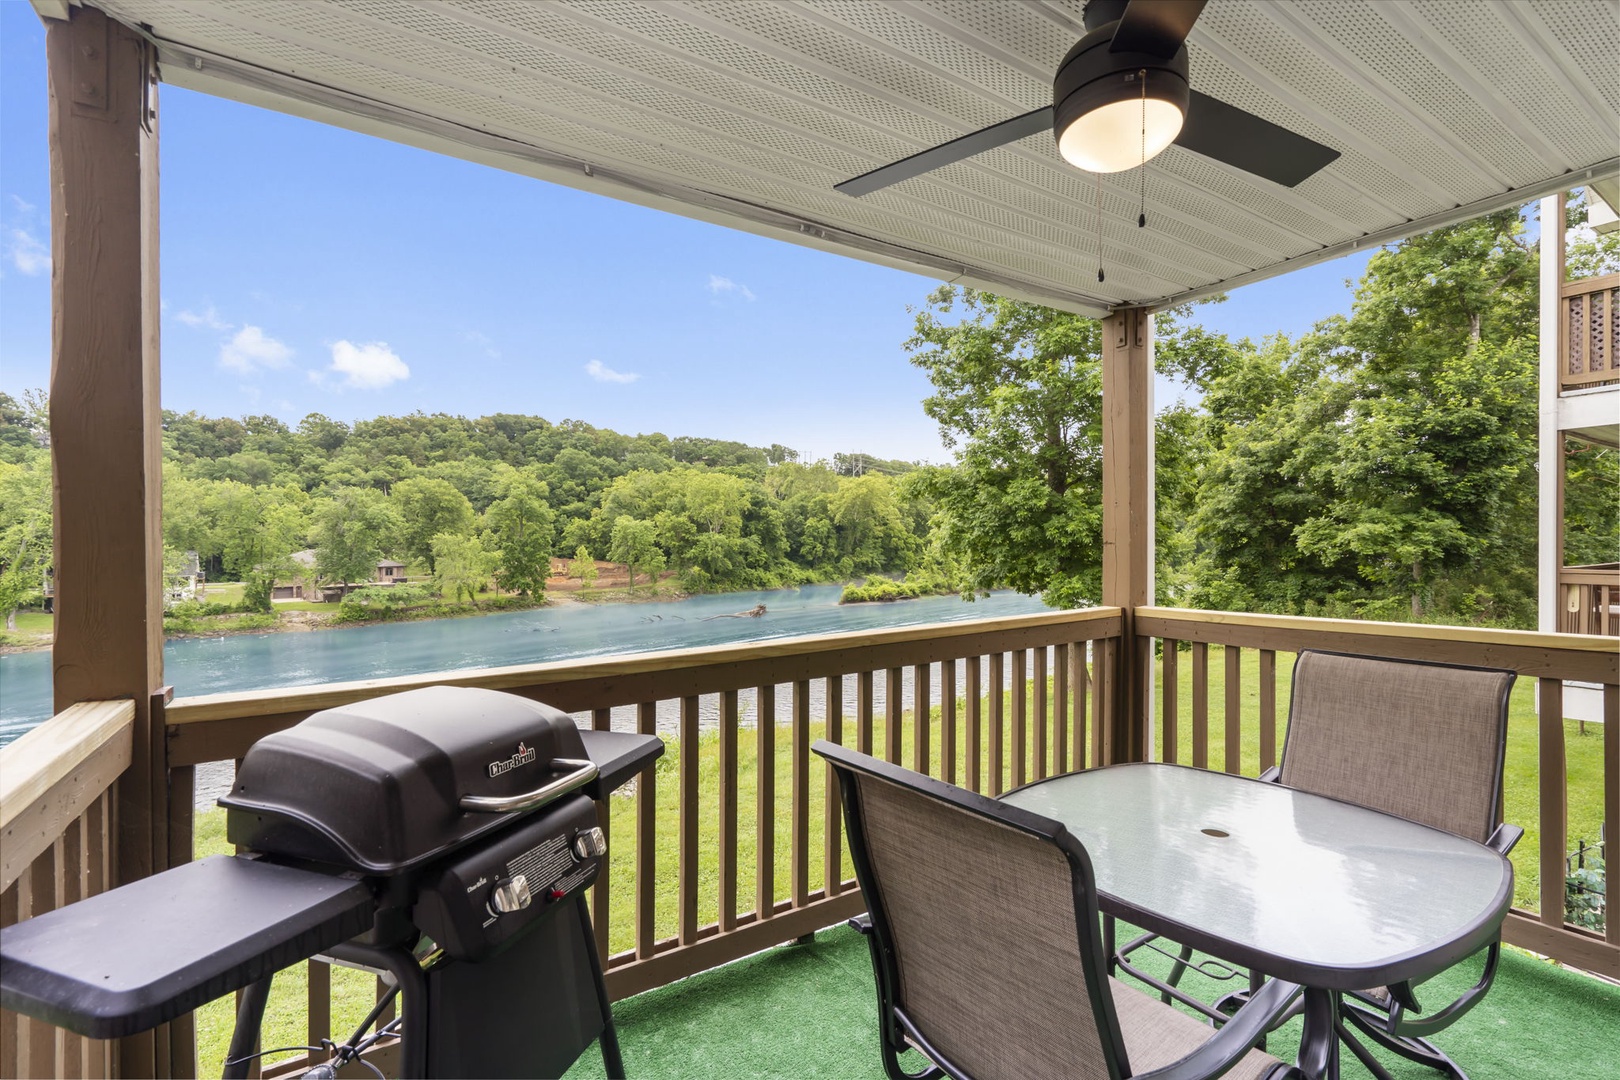 Enjoy the fresh air on the private deck overlooking the lake